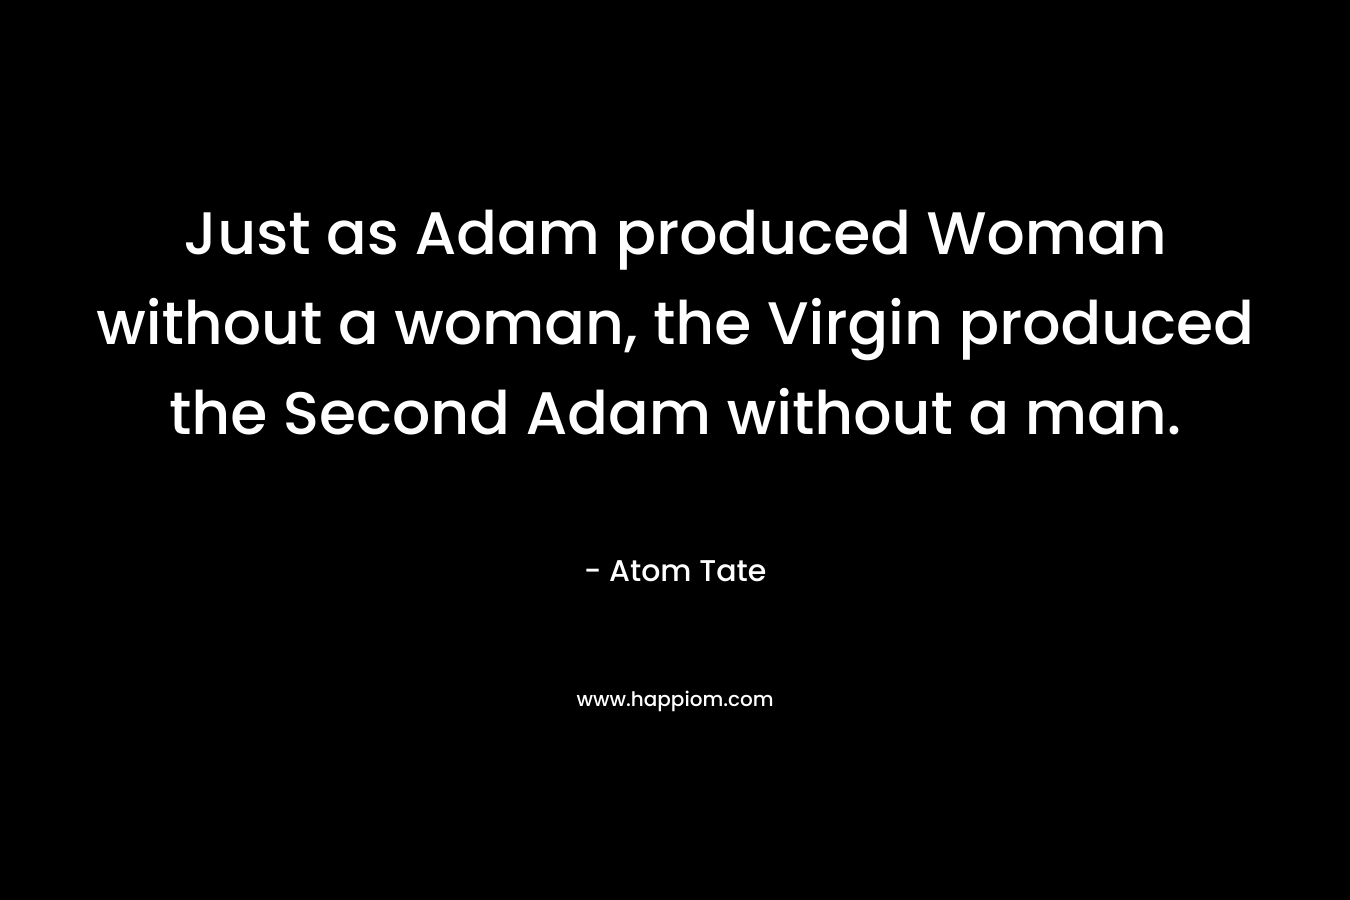 Just as Adam produced Woman without a woman, the Virgin produced the Second Adam without a man.